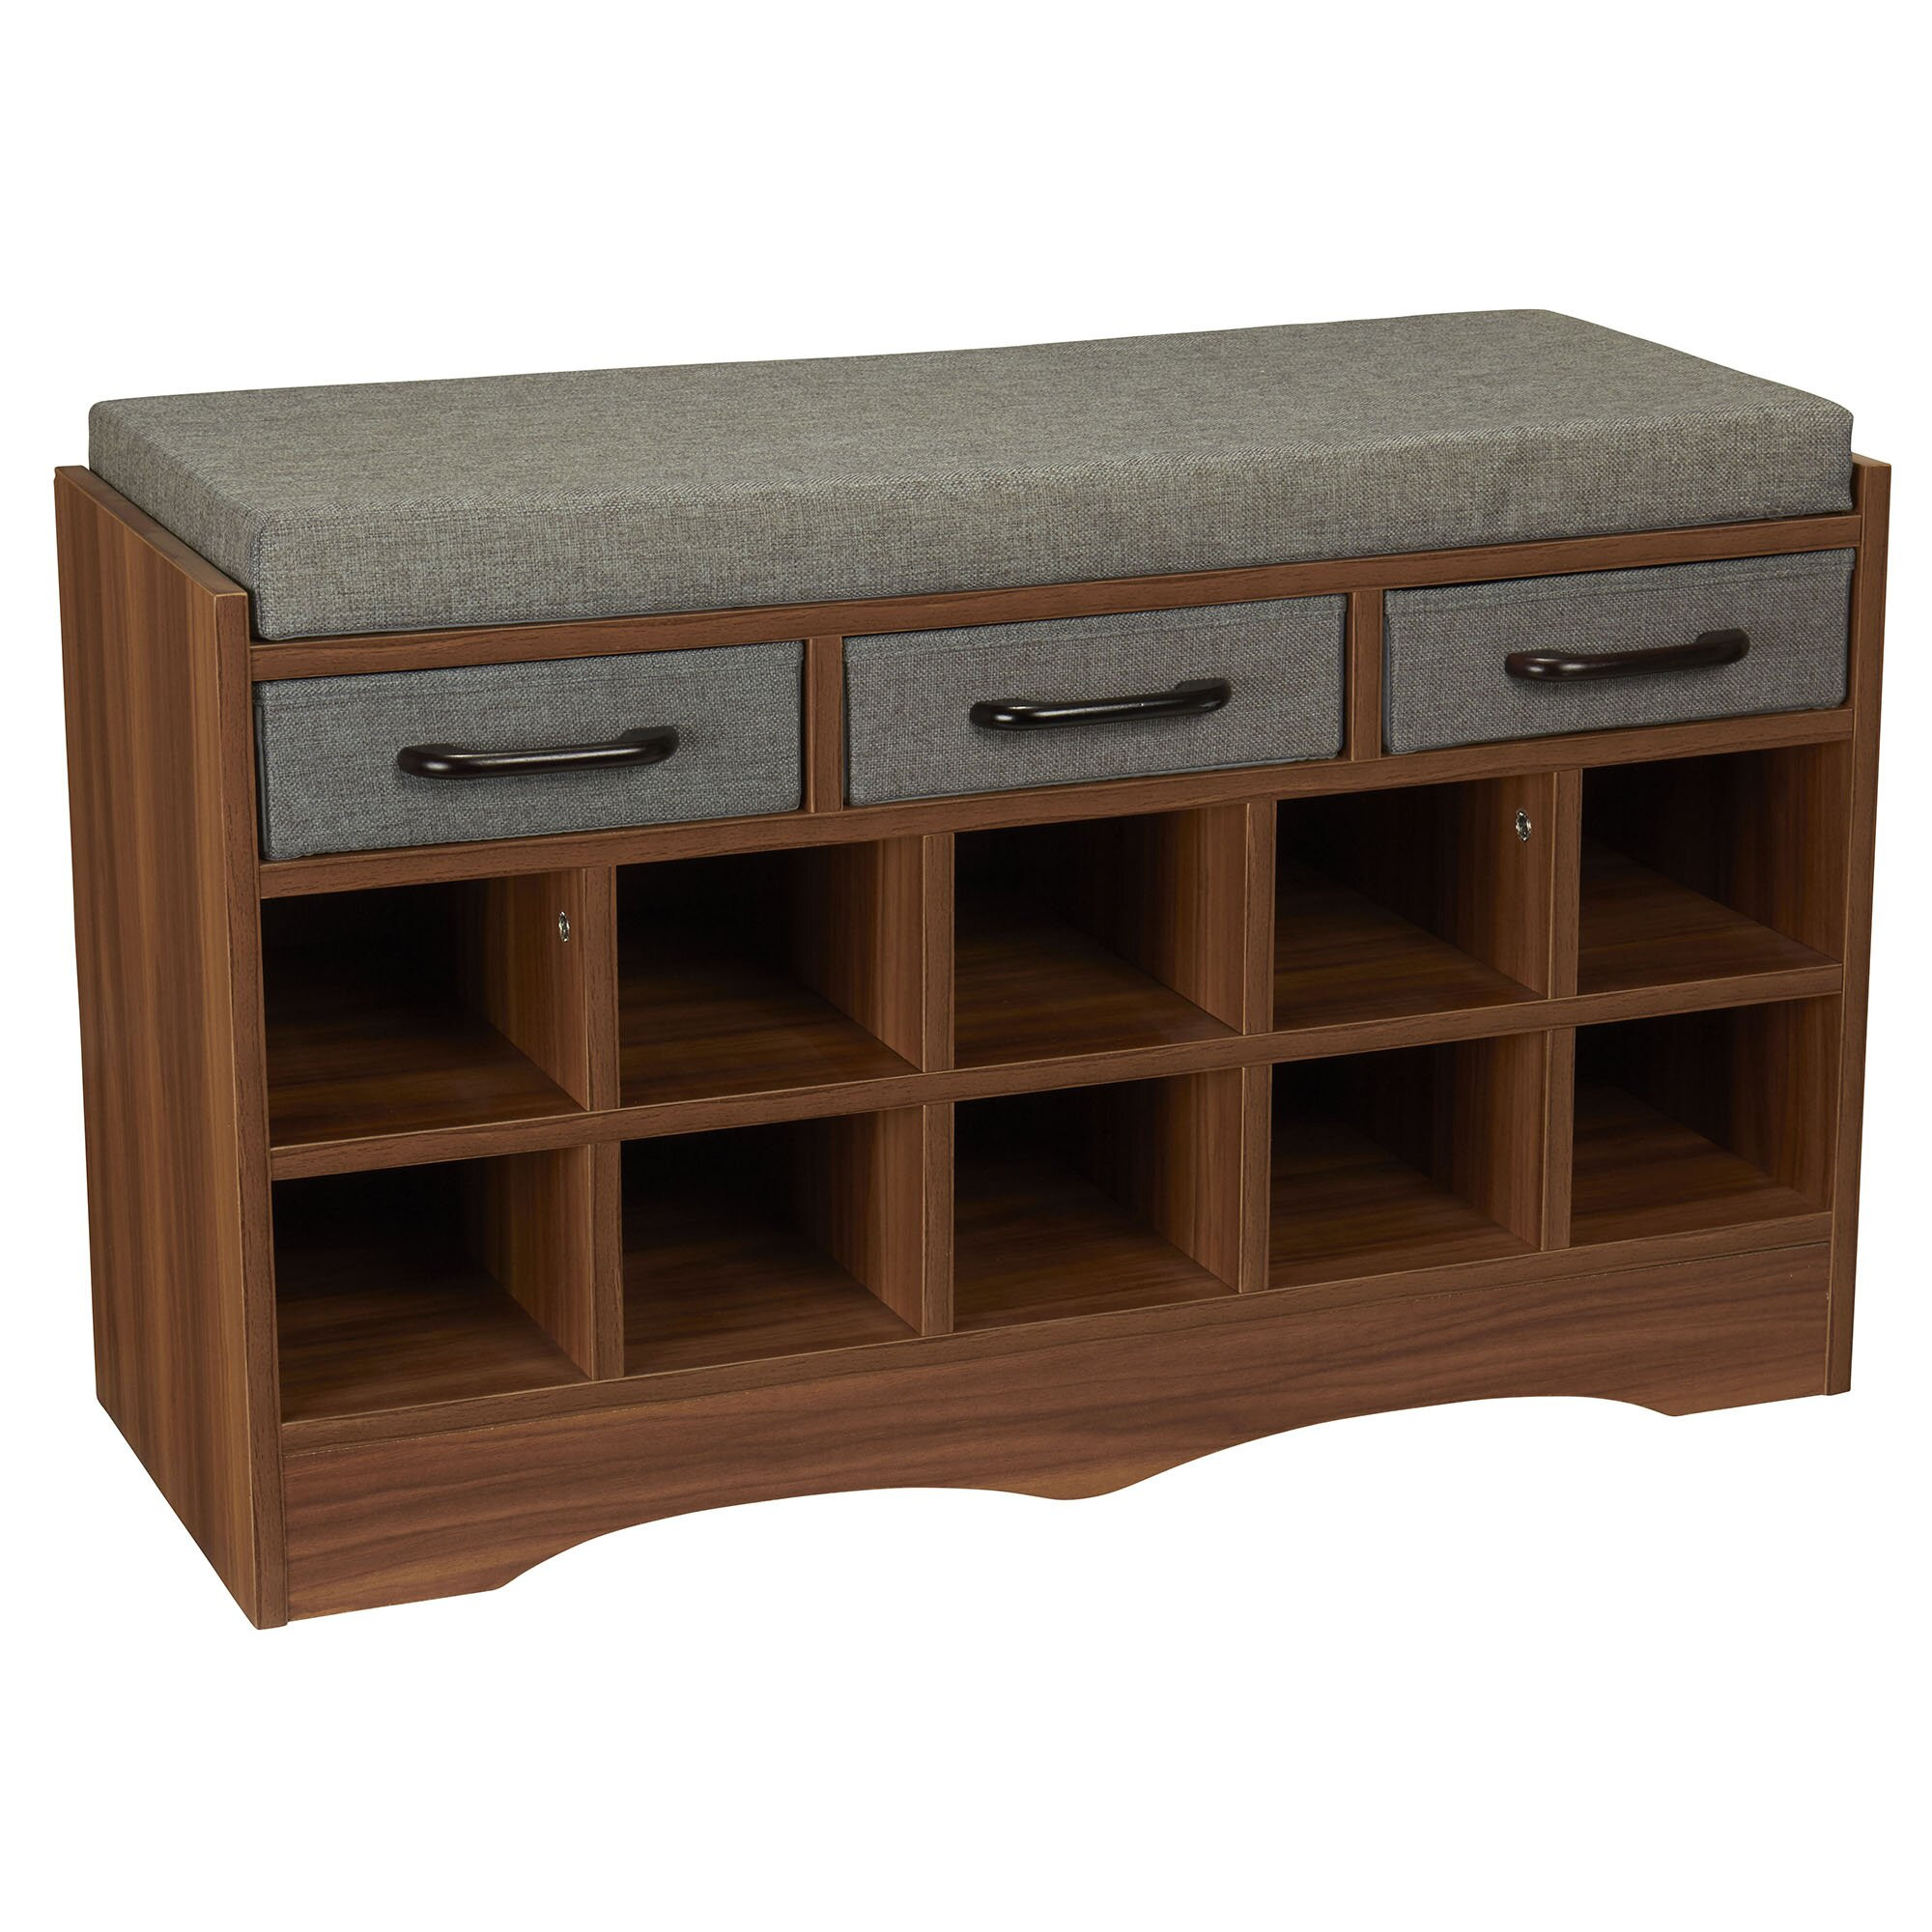 Entry Way Storage Bench
 Household Essentials Entryway Shoe Storage Bench & Reviews